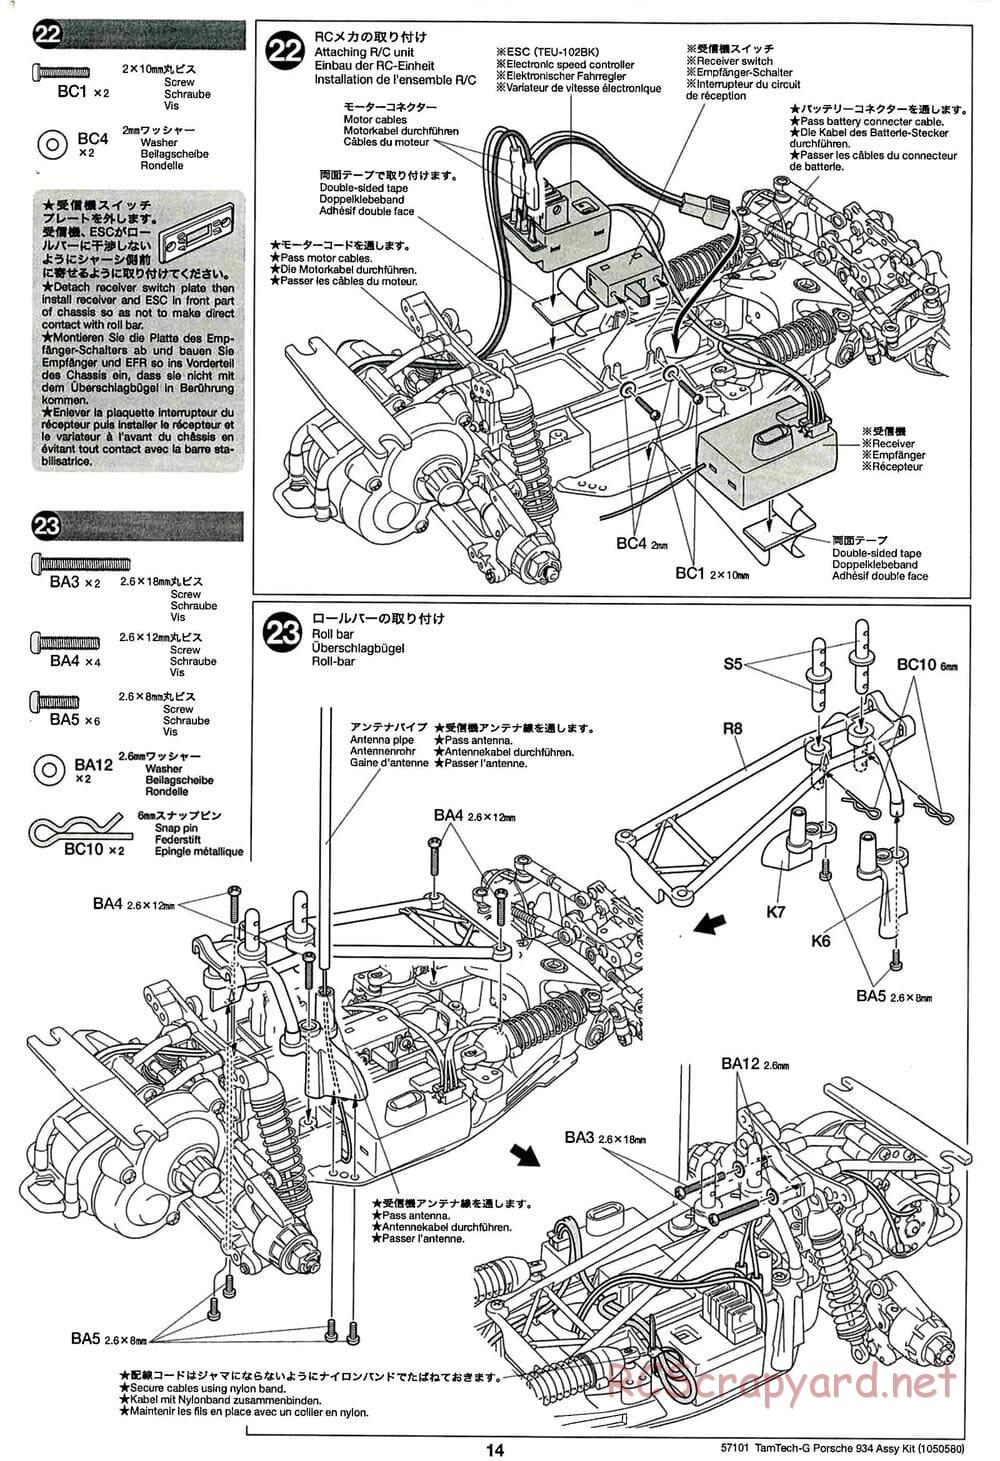 Tamiya - Porsche Turbo RSR - GT-01 Chassis - Manual - Page 14